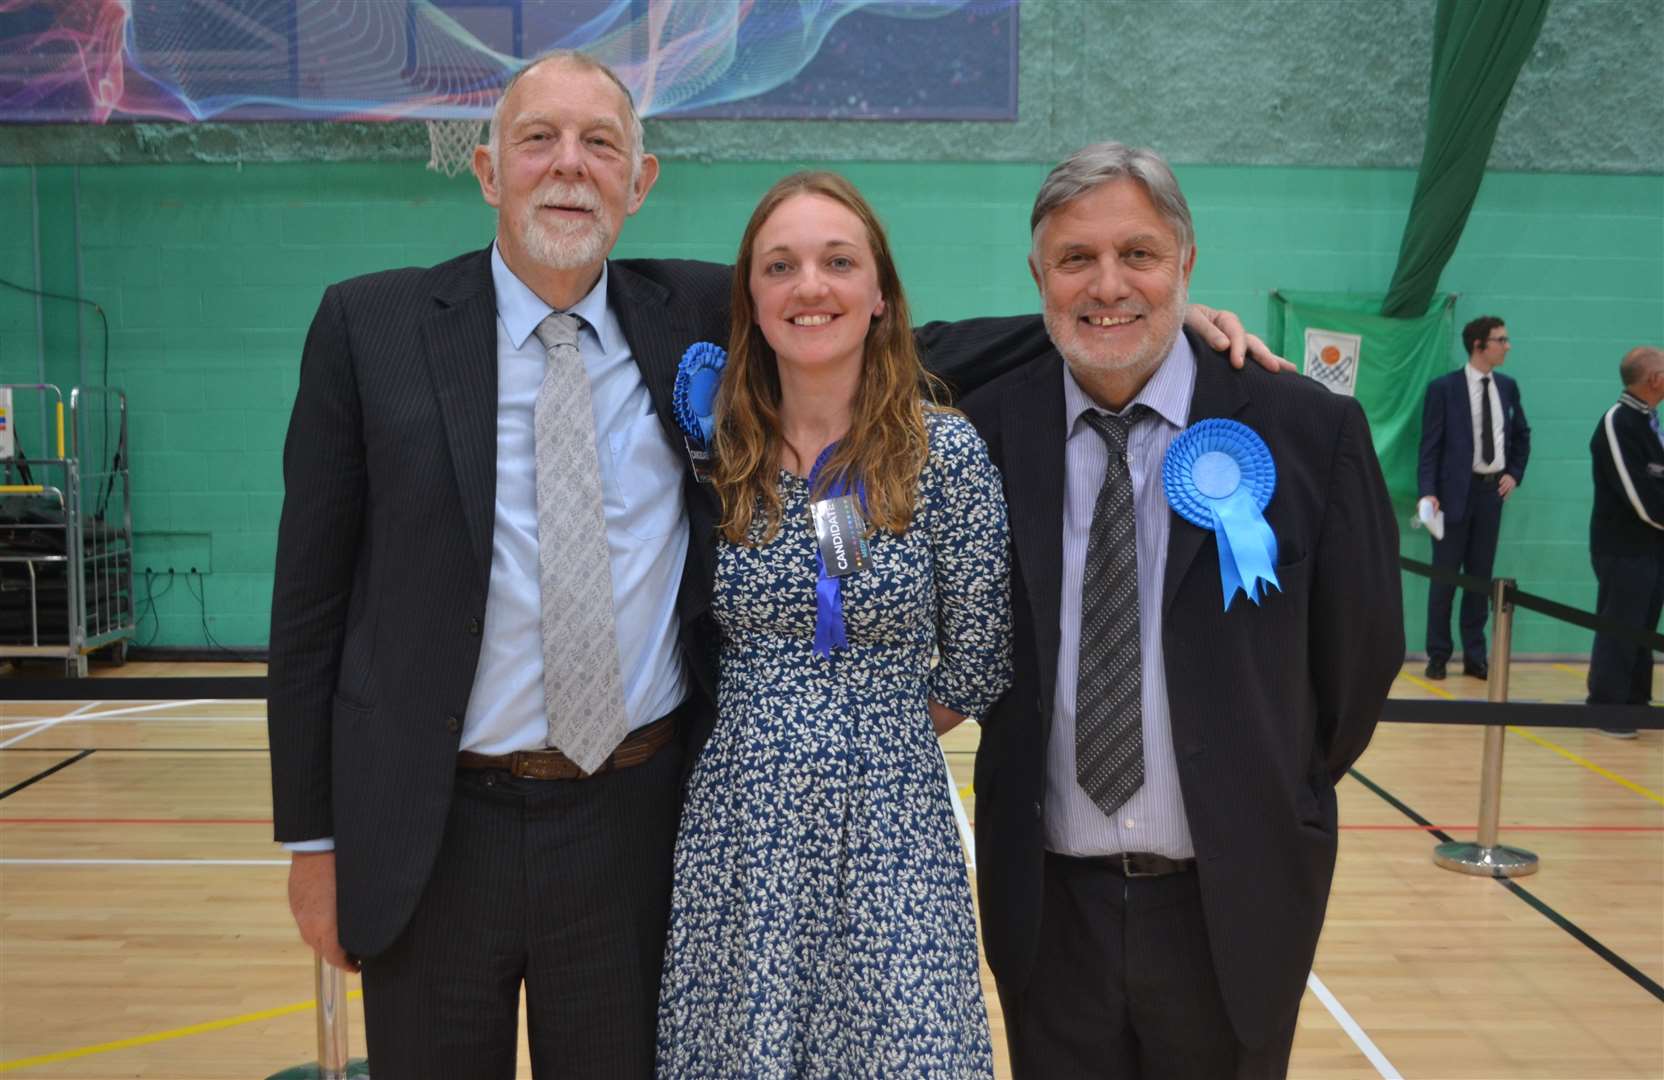 Cllr Turpin was elected as a Conservative to the Strood Rural ward alongside (left to right) Cllr Gary Etheridge and John Williams in 2019 but resigned as deputy leader and from the group in February.